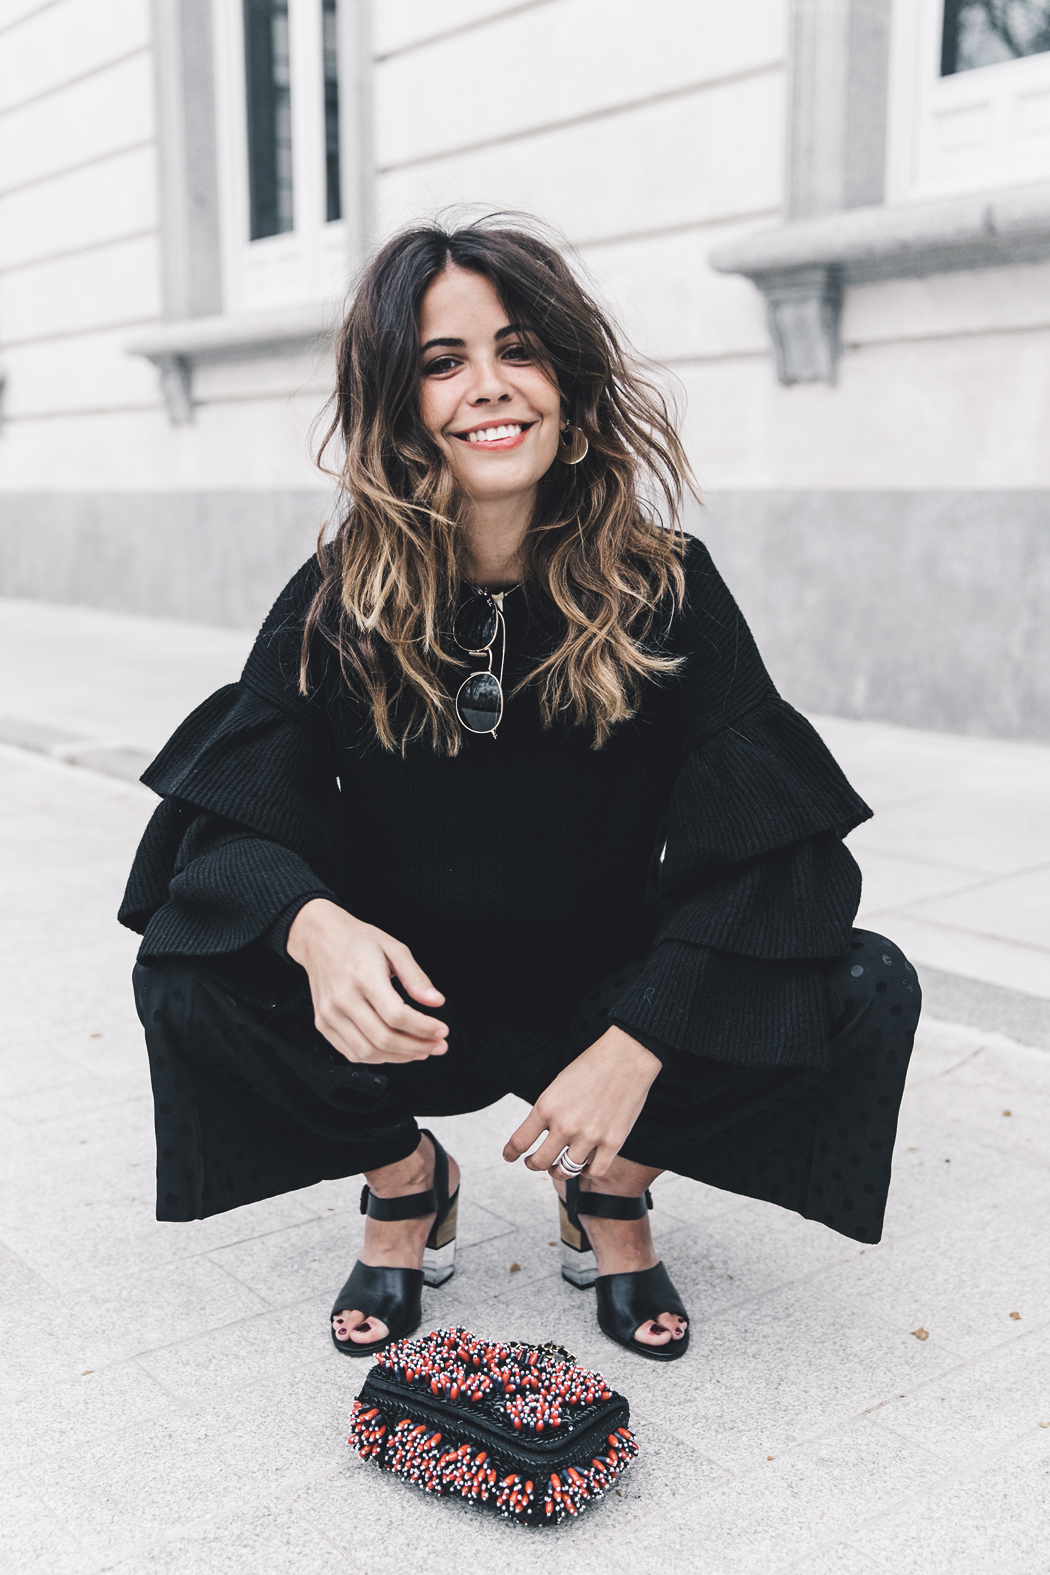 Ruffled_Sleeves_Jumper-Black_Culottes-Dune_Sandals-Beaded_Bag-Outfit-Collage_Vintage-Street_Style-42